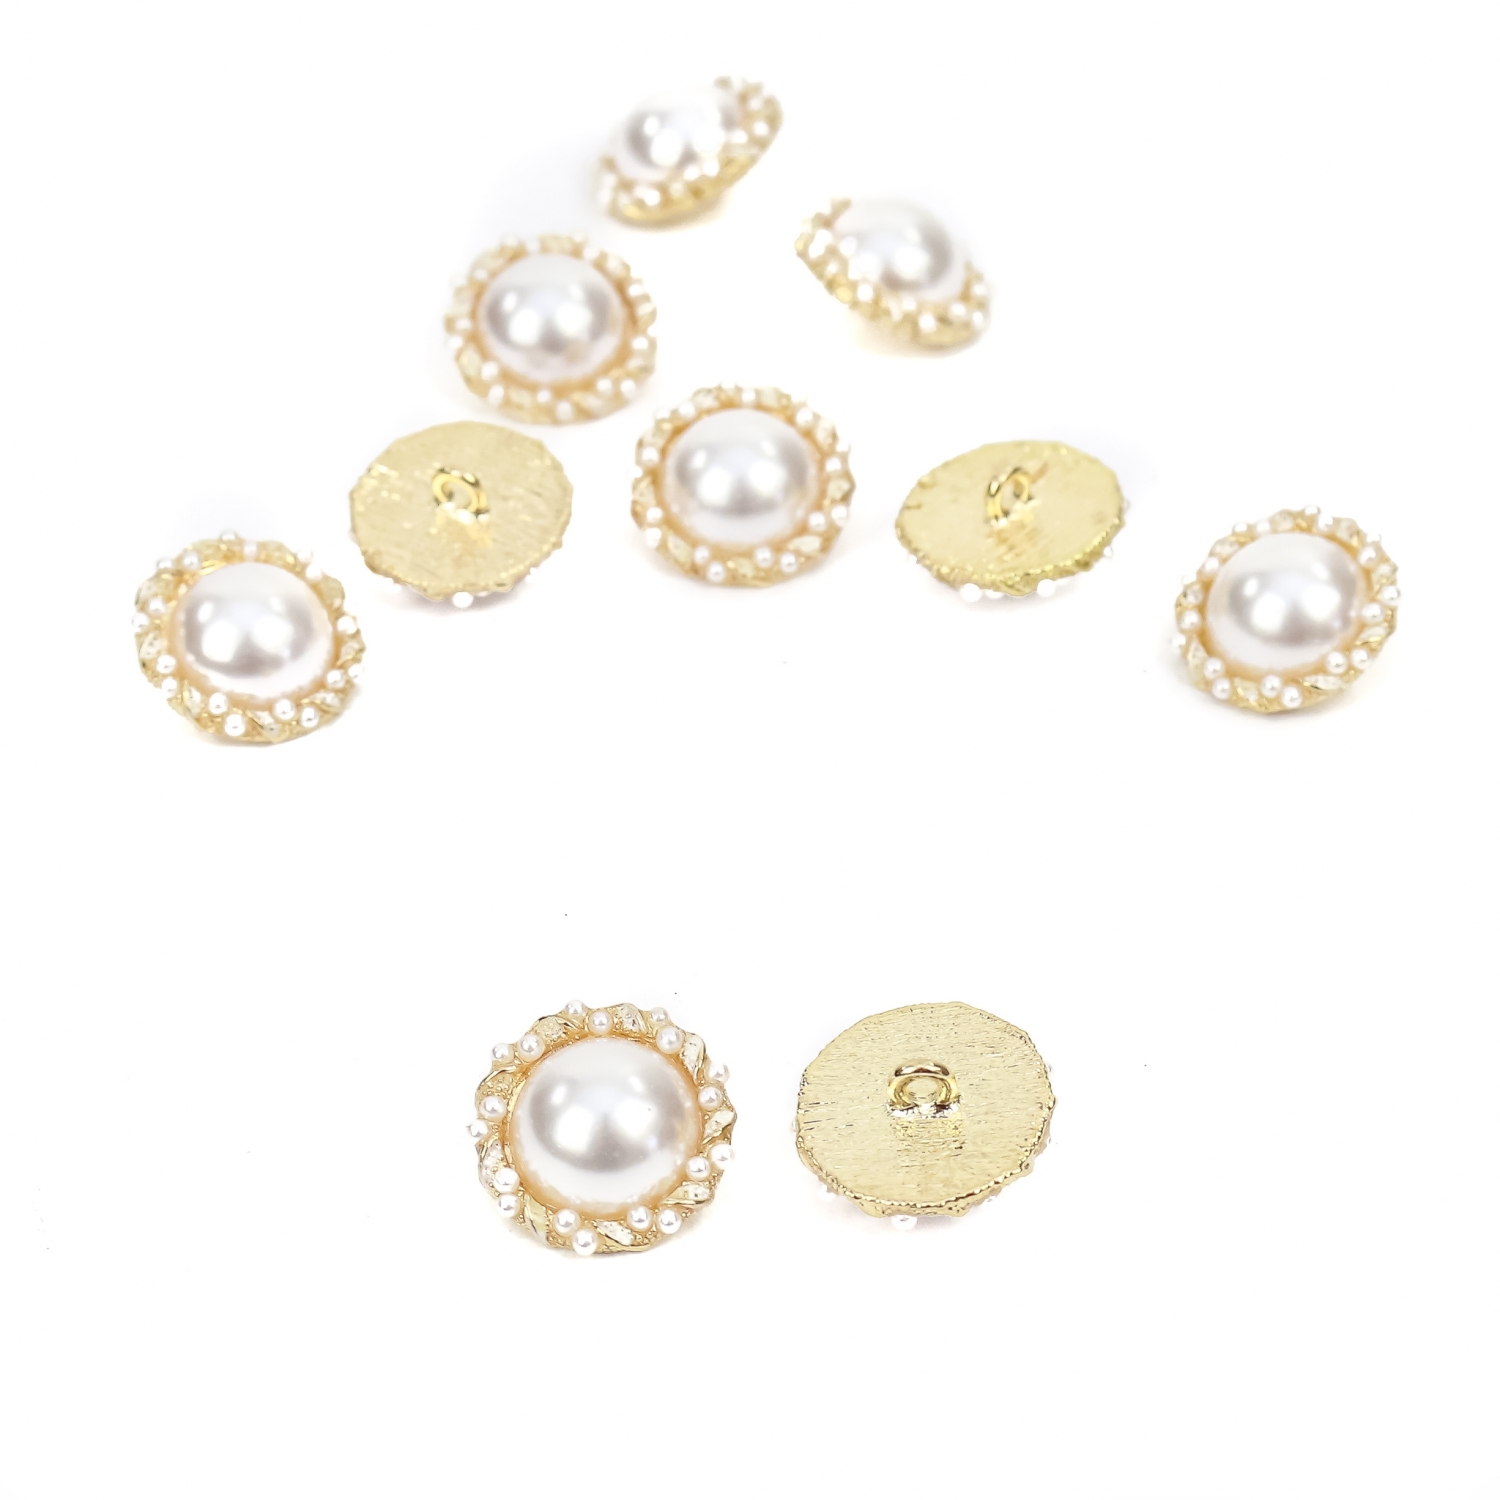 Shank Buttons with Pearls, Size 20 mm (10 pcs/pack) Code: BT1171